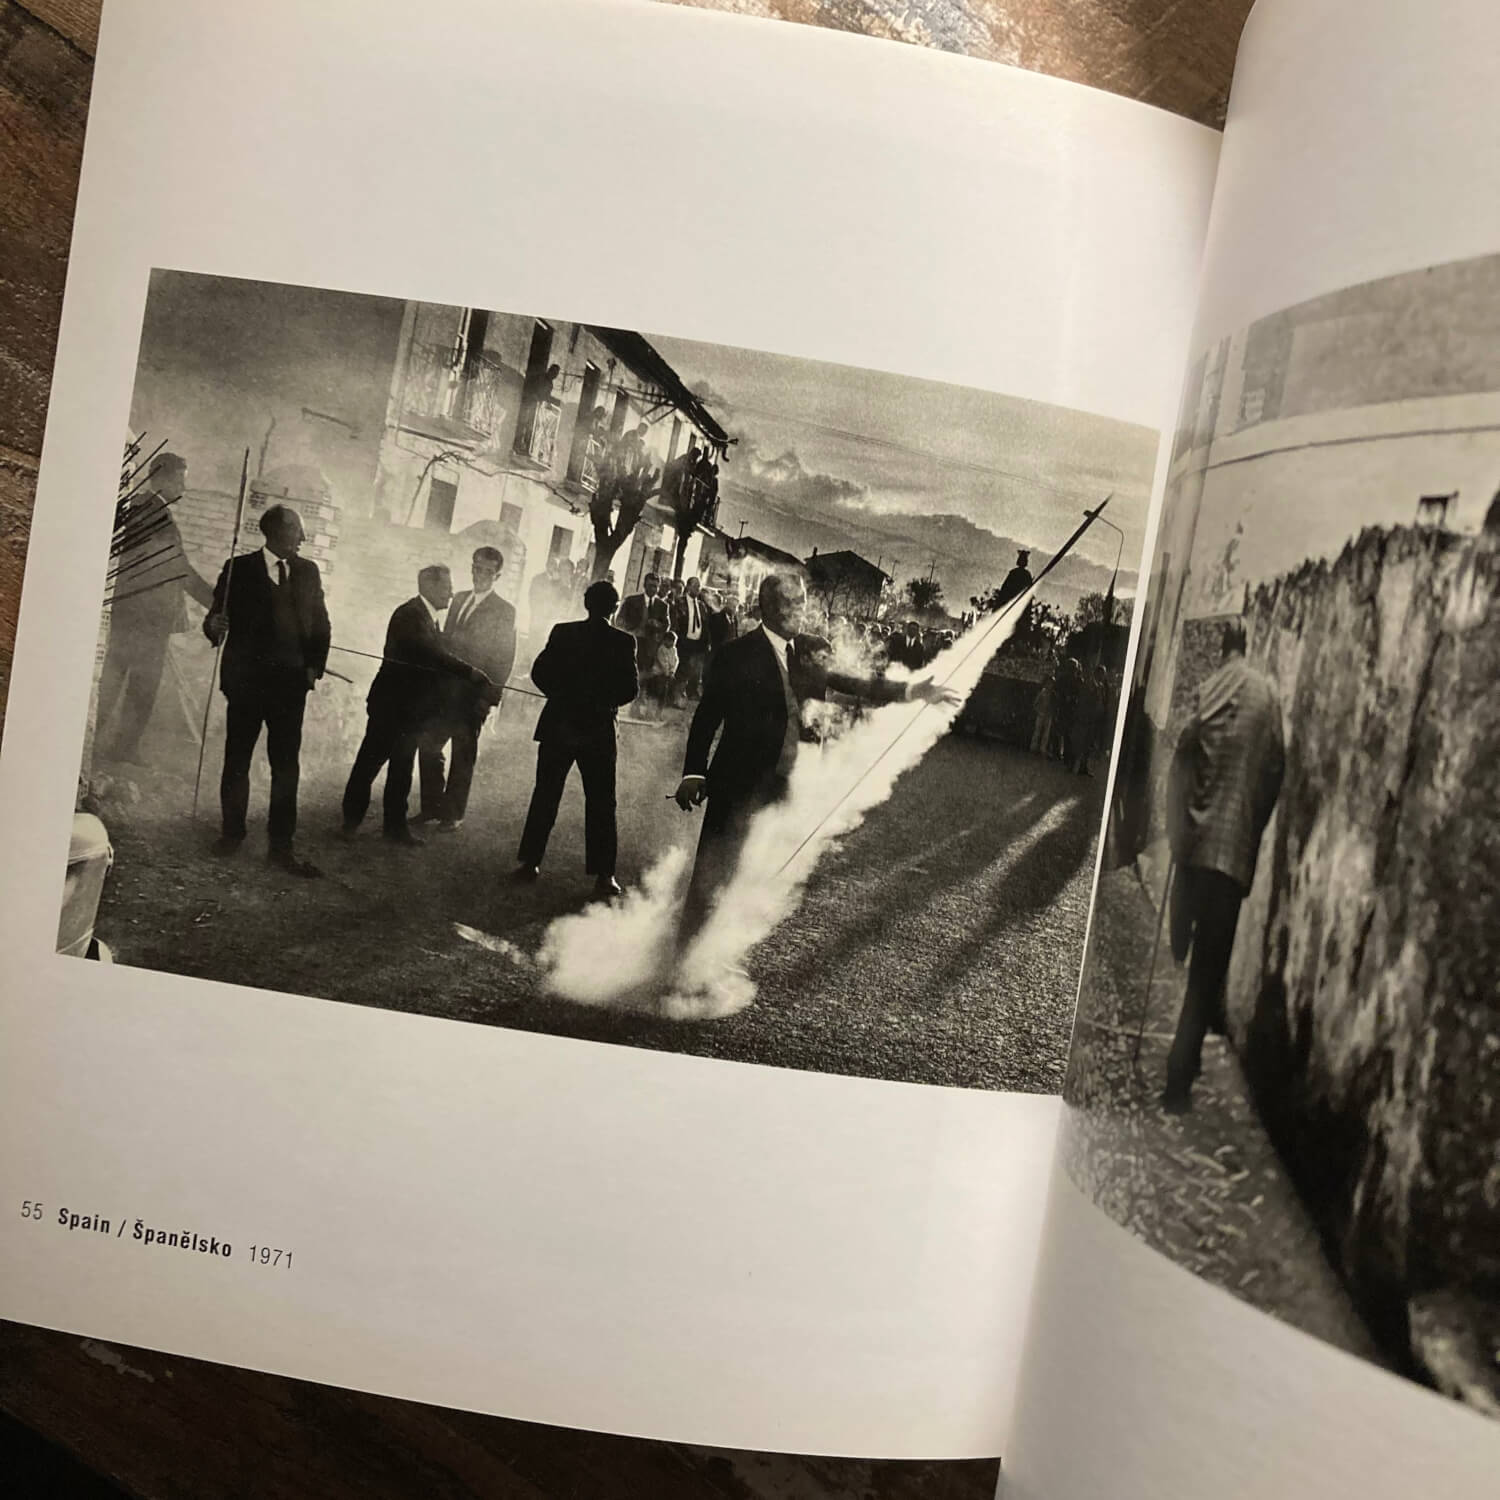 Josef Joudelka, 1971. I bought this book at a flea market for around 5 euros, and it covers Koudelka's entire photographic career with a good print quality.